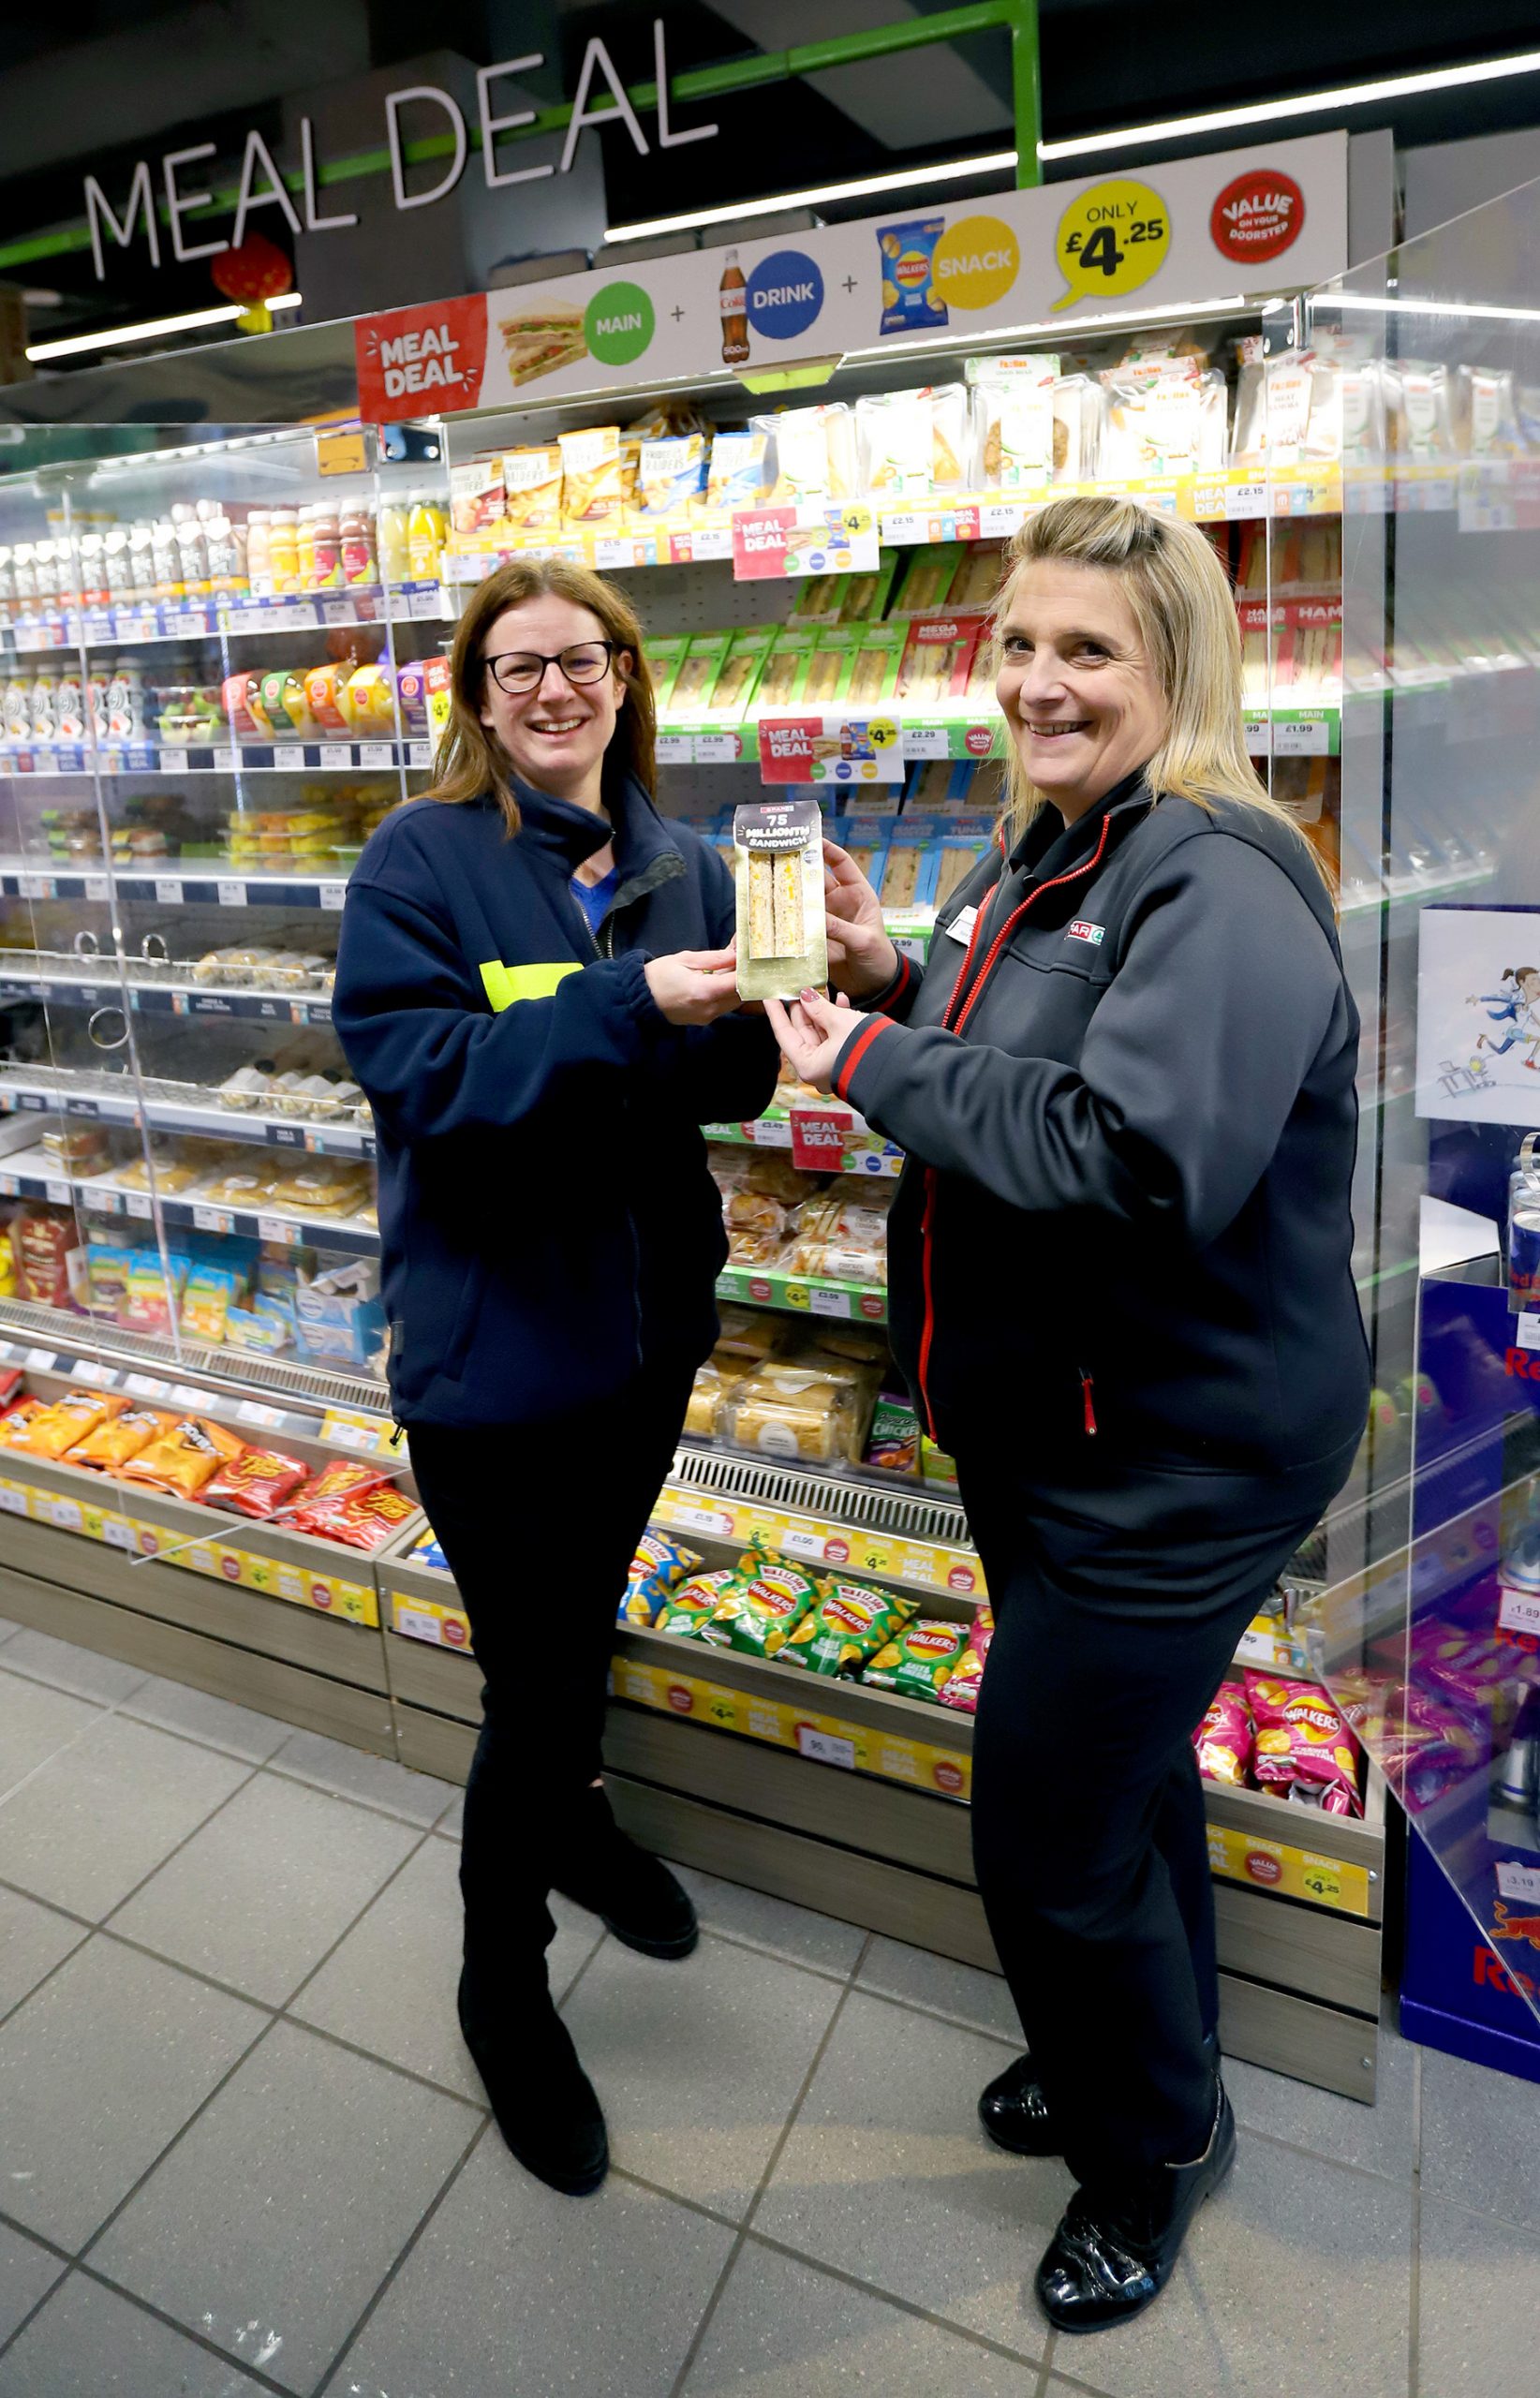 Sally Sneddon, Food To Go Trading Manager at James Hall & Co. Ltd, and Maxine Dover, Store Manager at SPAR Lancaster University, with the 75 millionth sandwich manufactured by the Great Northern Sandwich Company part of the James Hall Group of Companies.